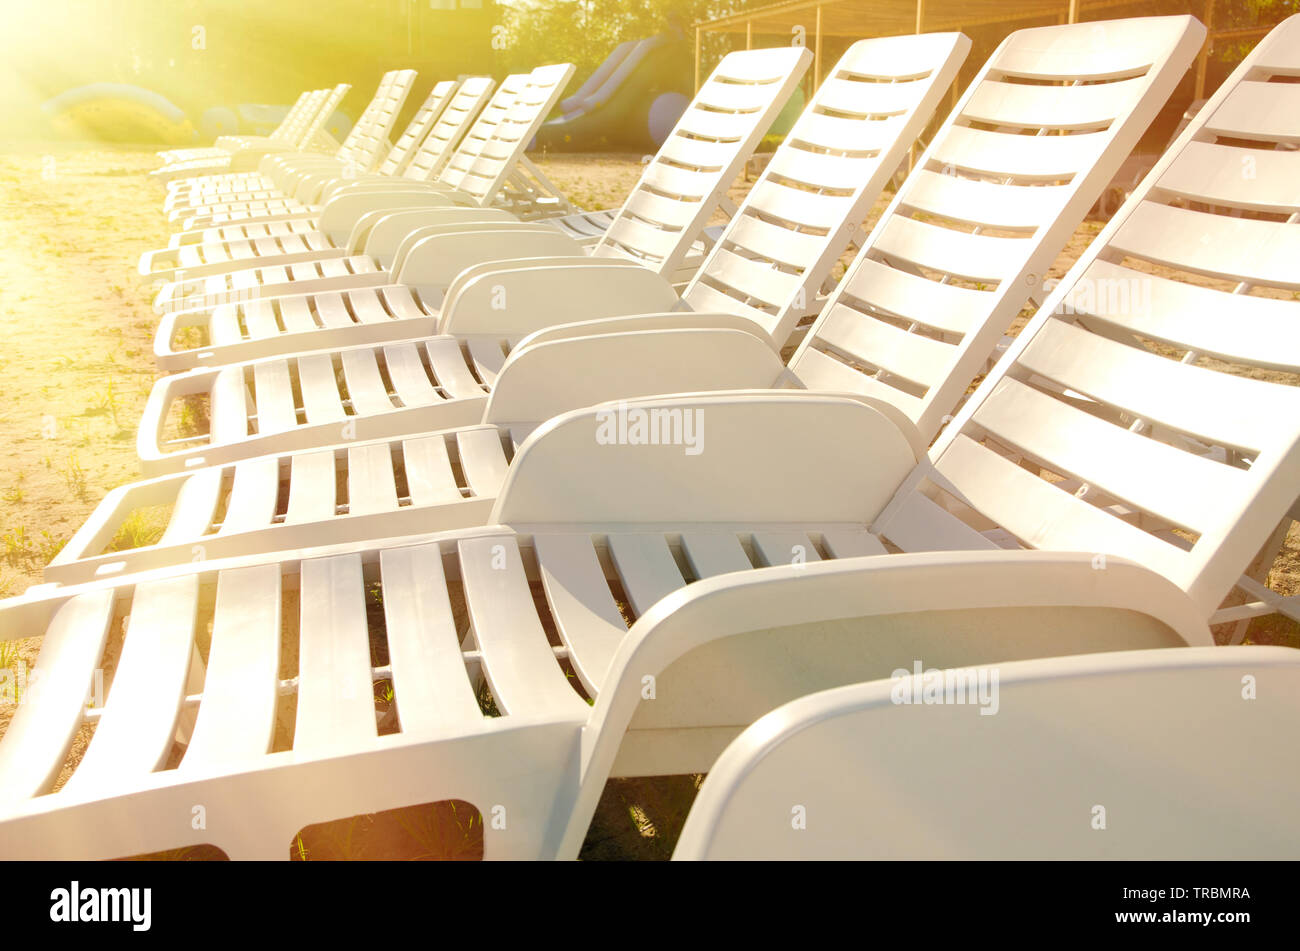 a lot of empty chaise lounges Stock Photo